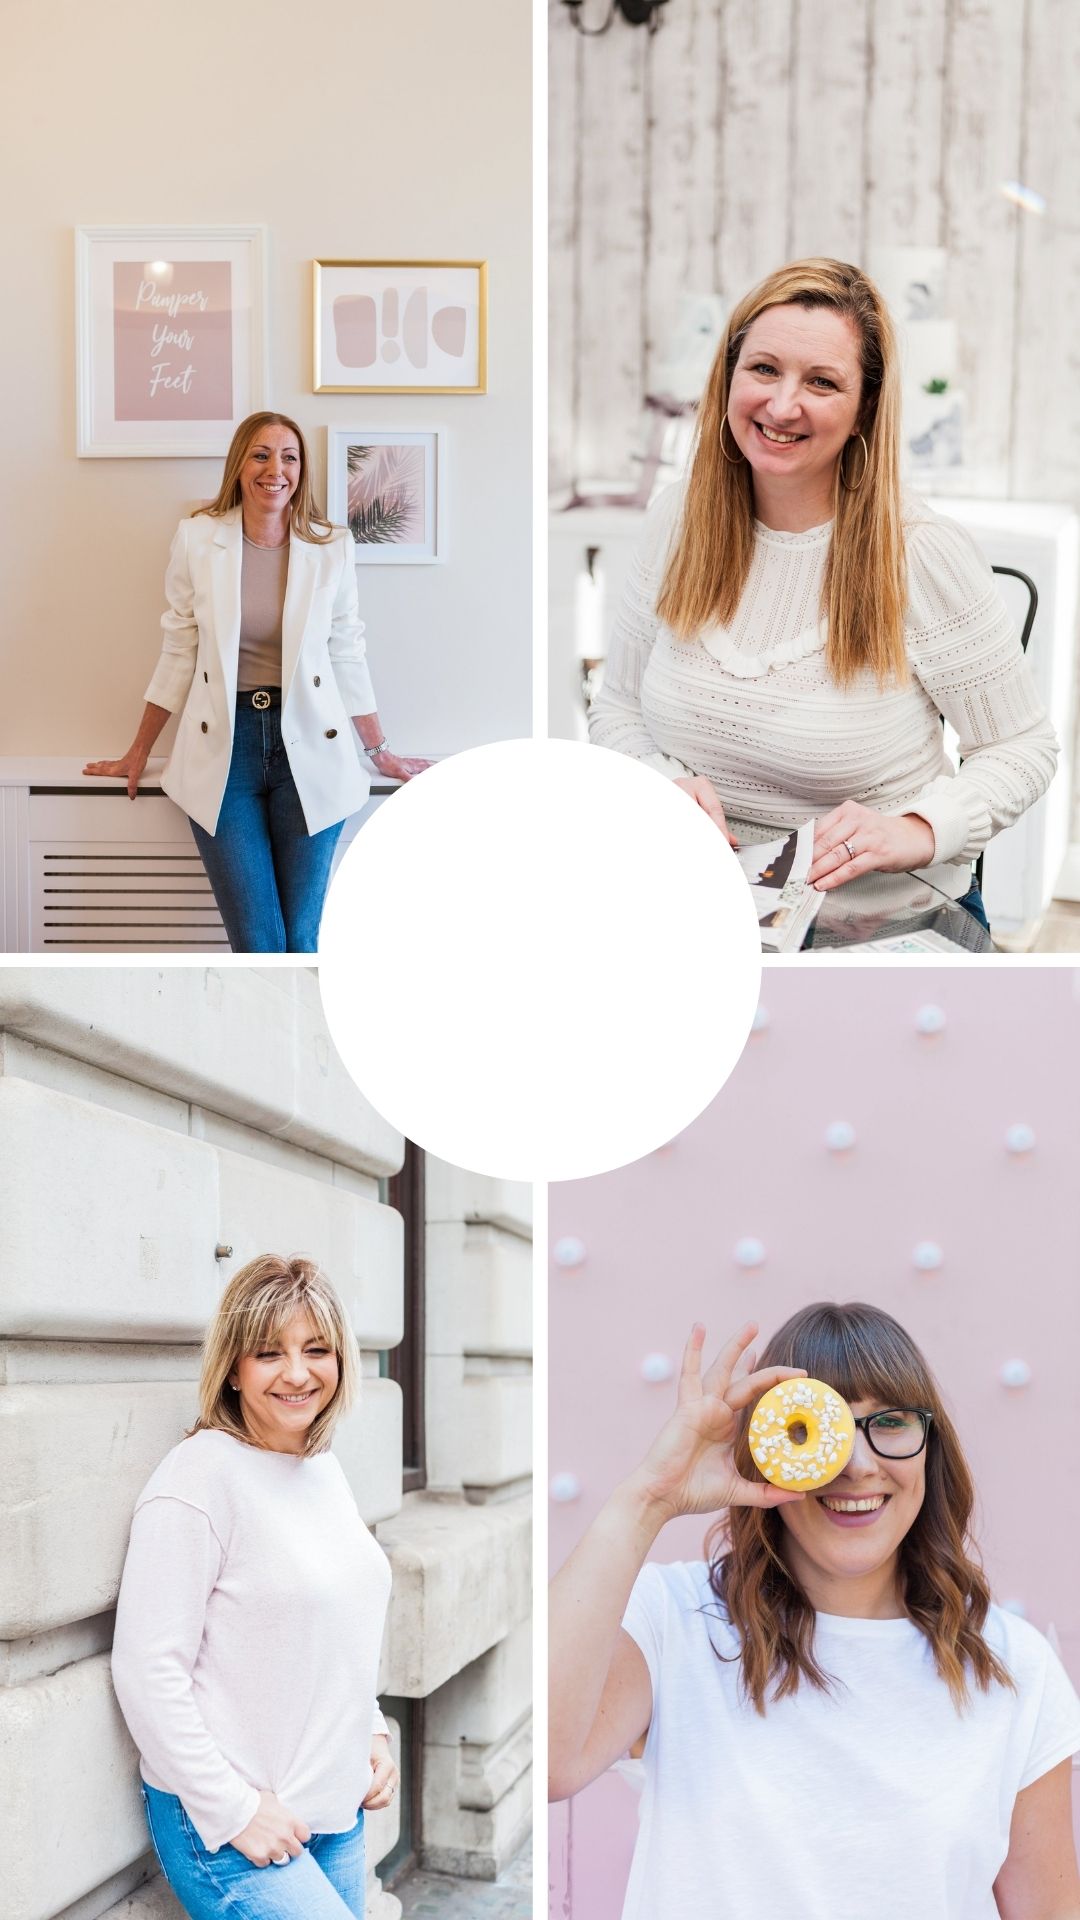 4 images of ladies wearing white for their brand shoot. images by London brand photographer AKP branding stories